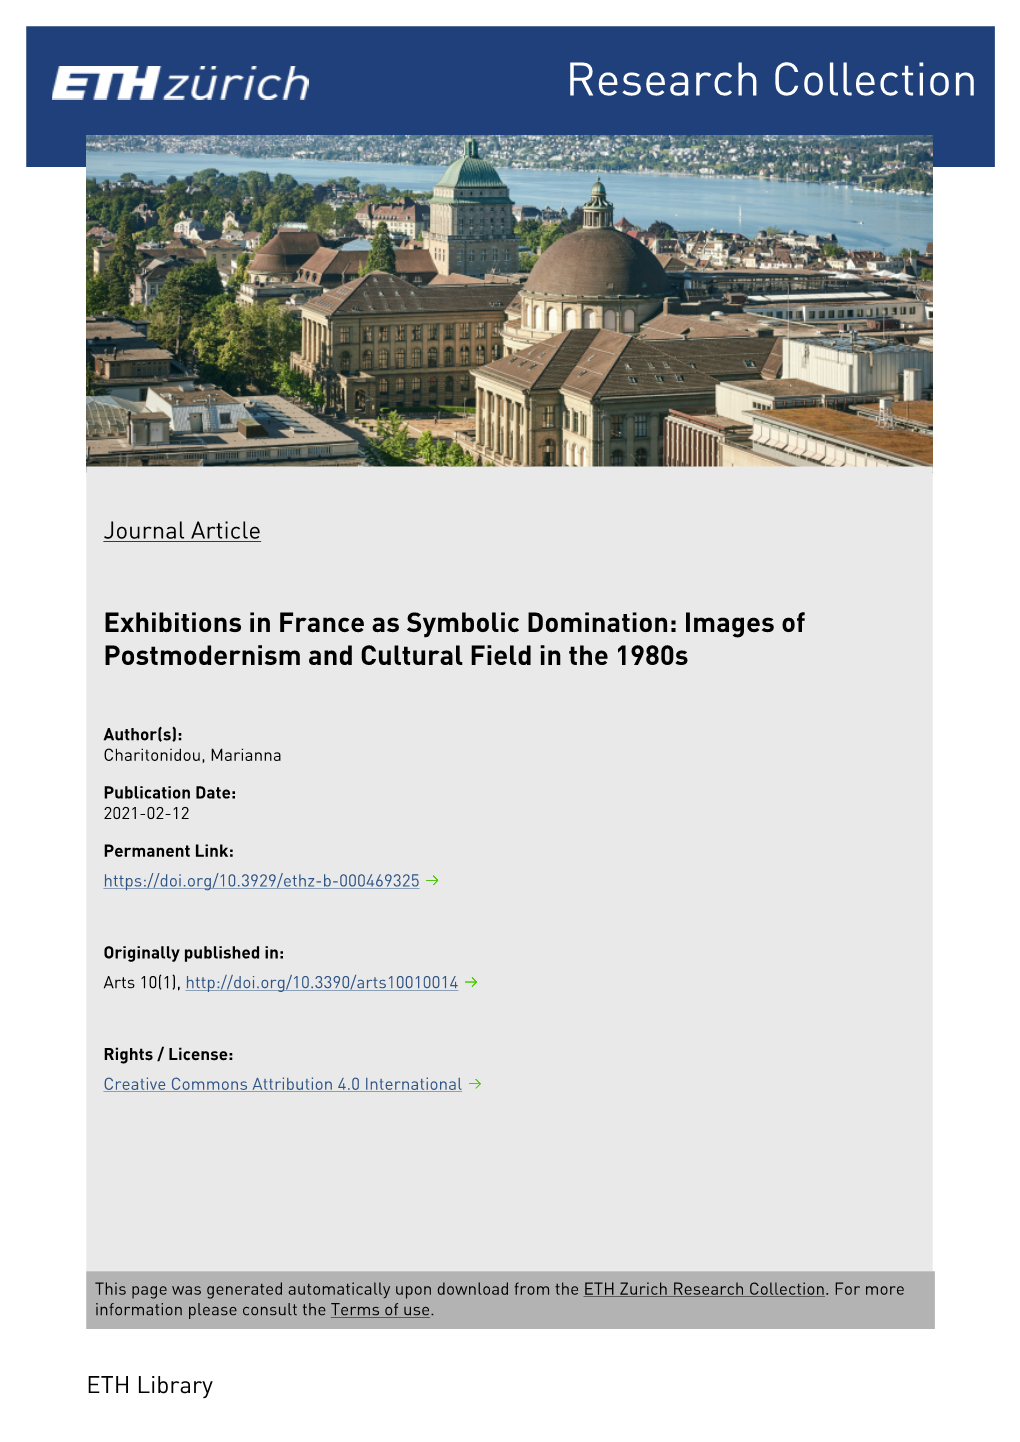 Exhibitions in France As Symbolic Domination: Images of Postmodernism and Cultural Field in the 1980S